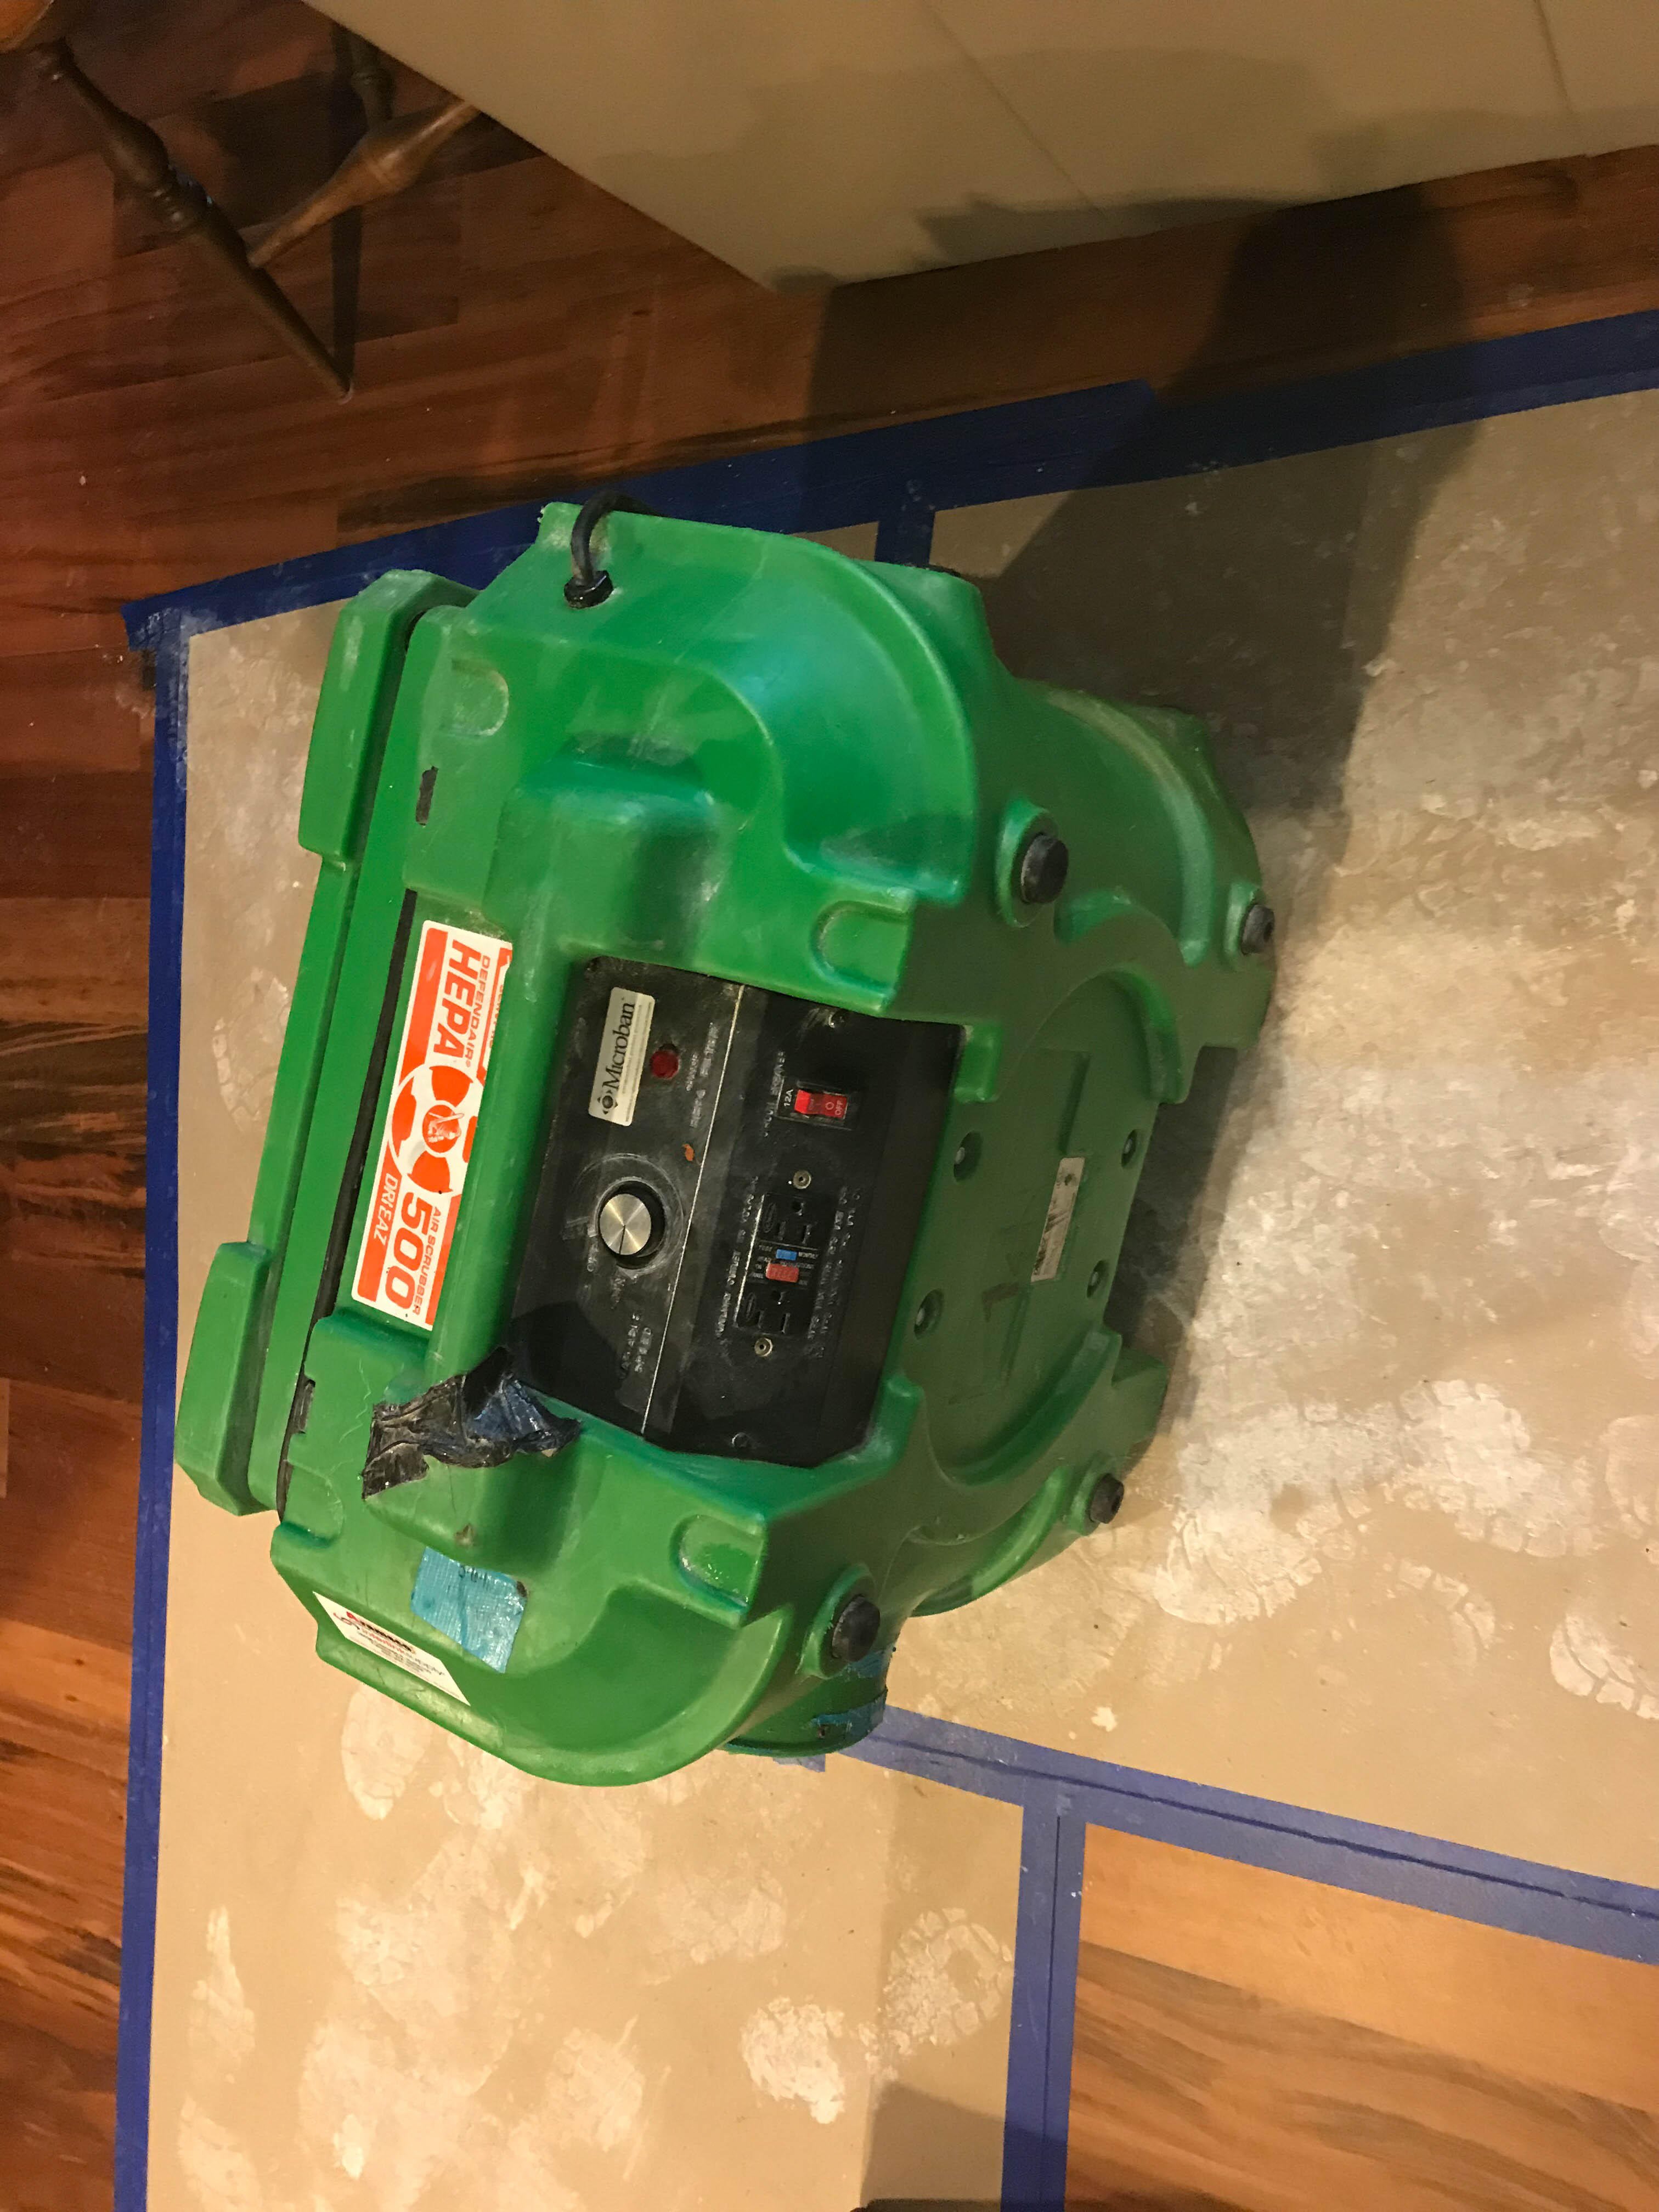 This little machine is incredibly powerful. It is working to scrub the bacteria from the air. SERVPRO of Renton is here to help!